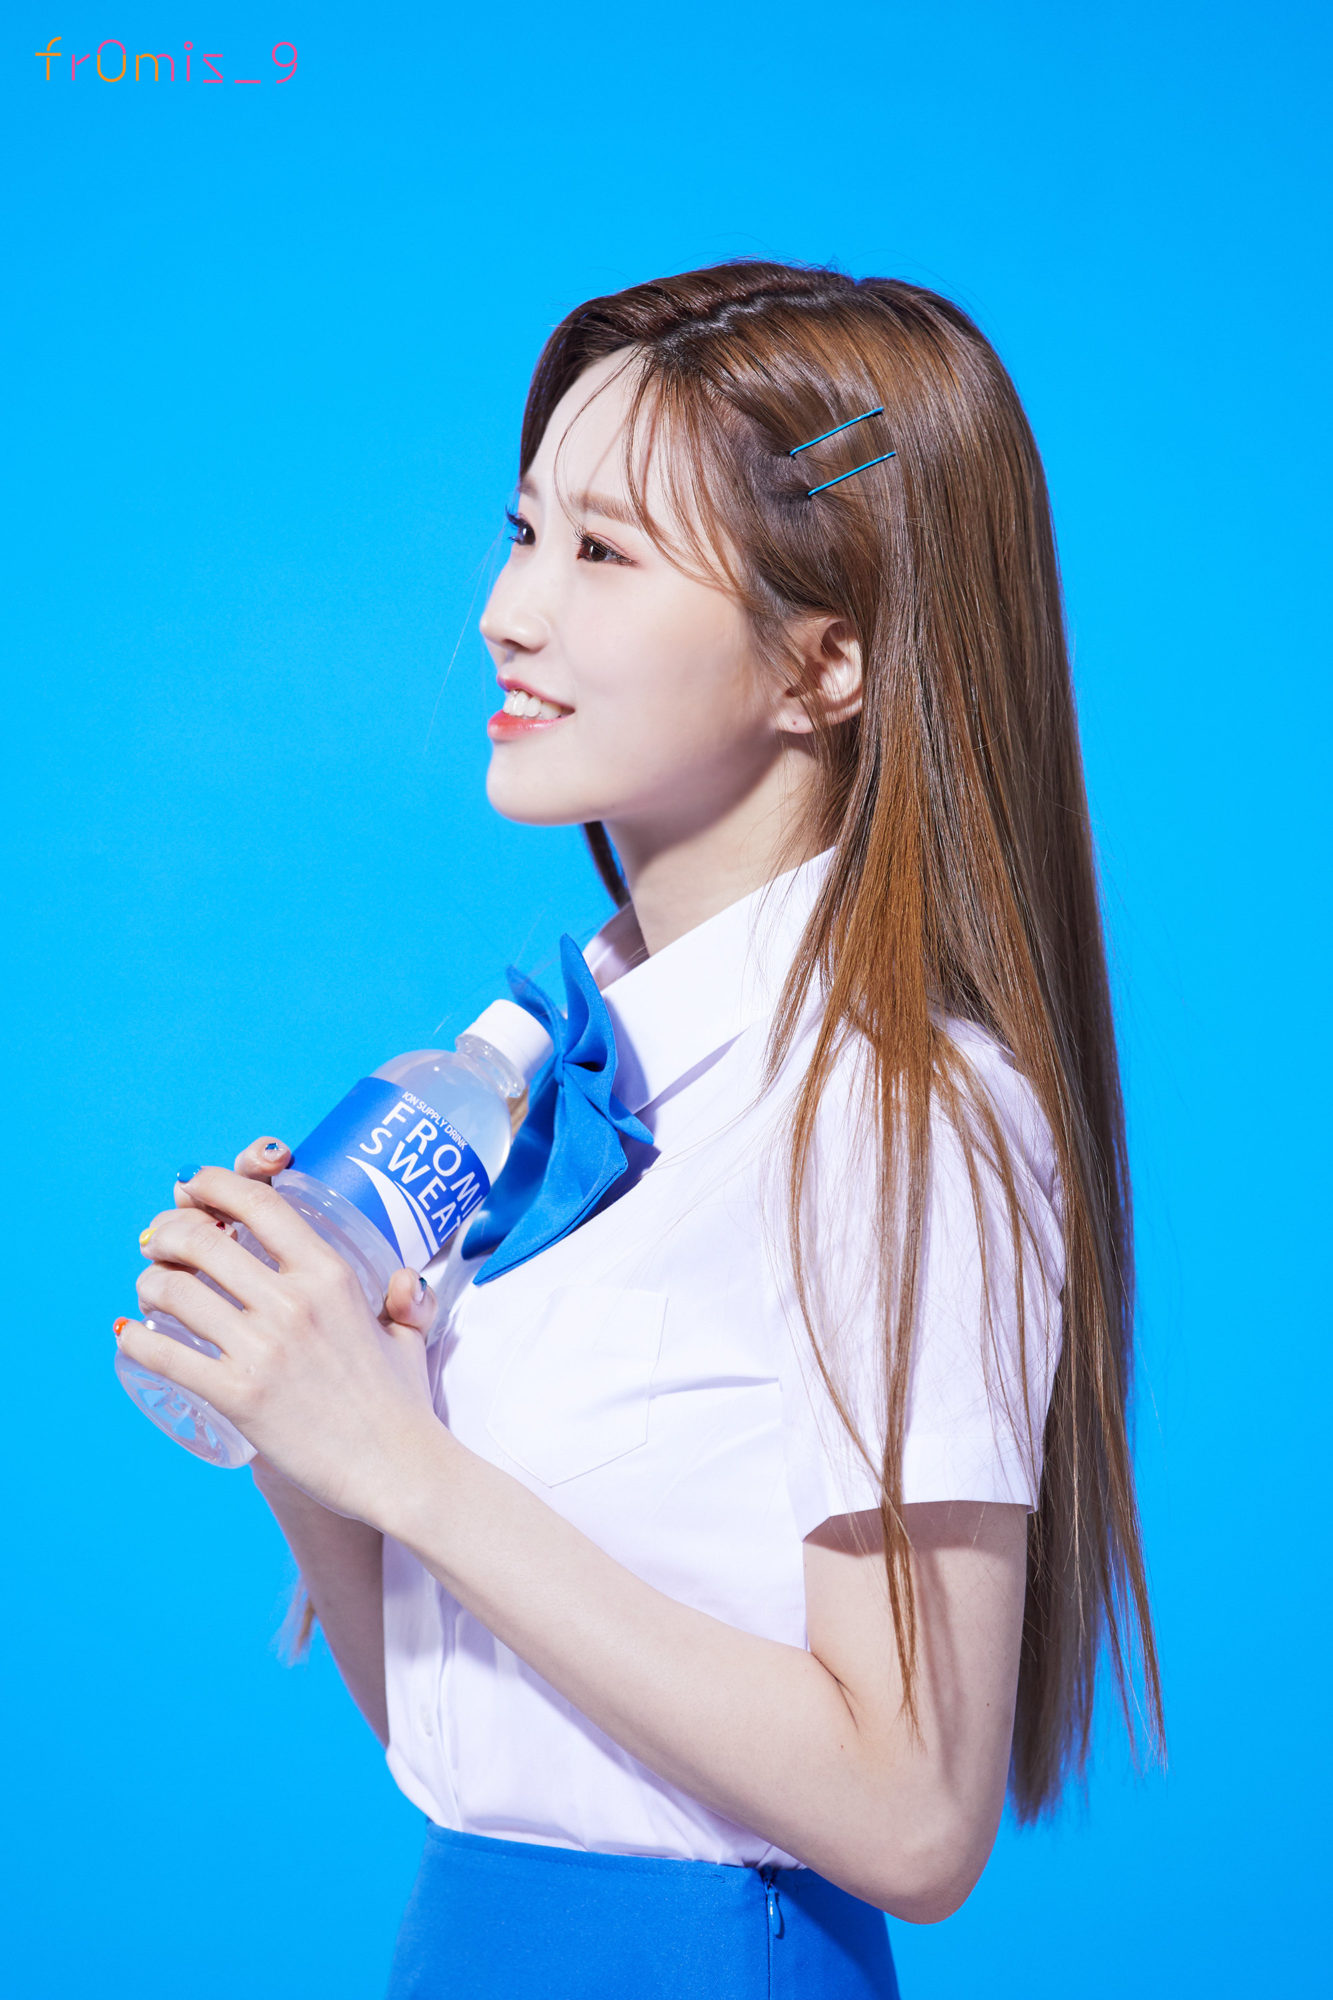 fromis_9 Hayoung Fun